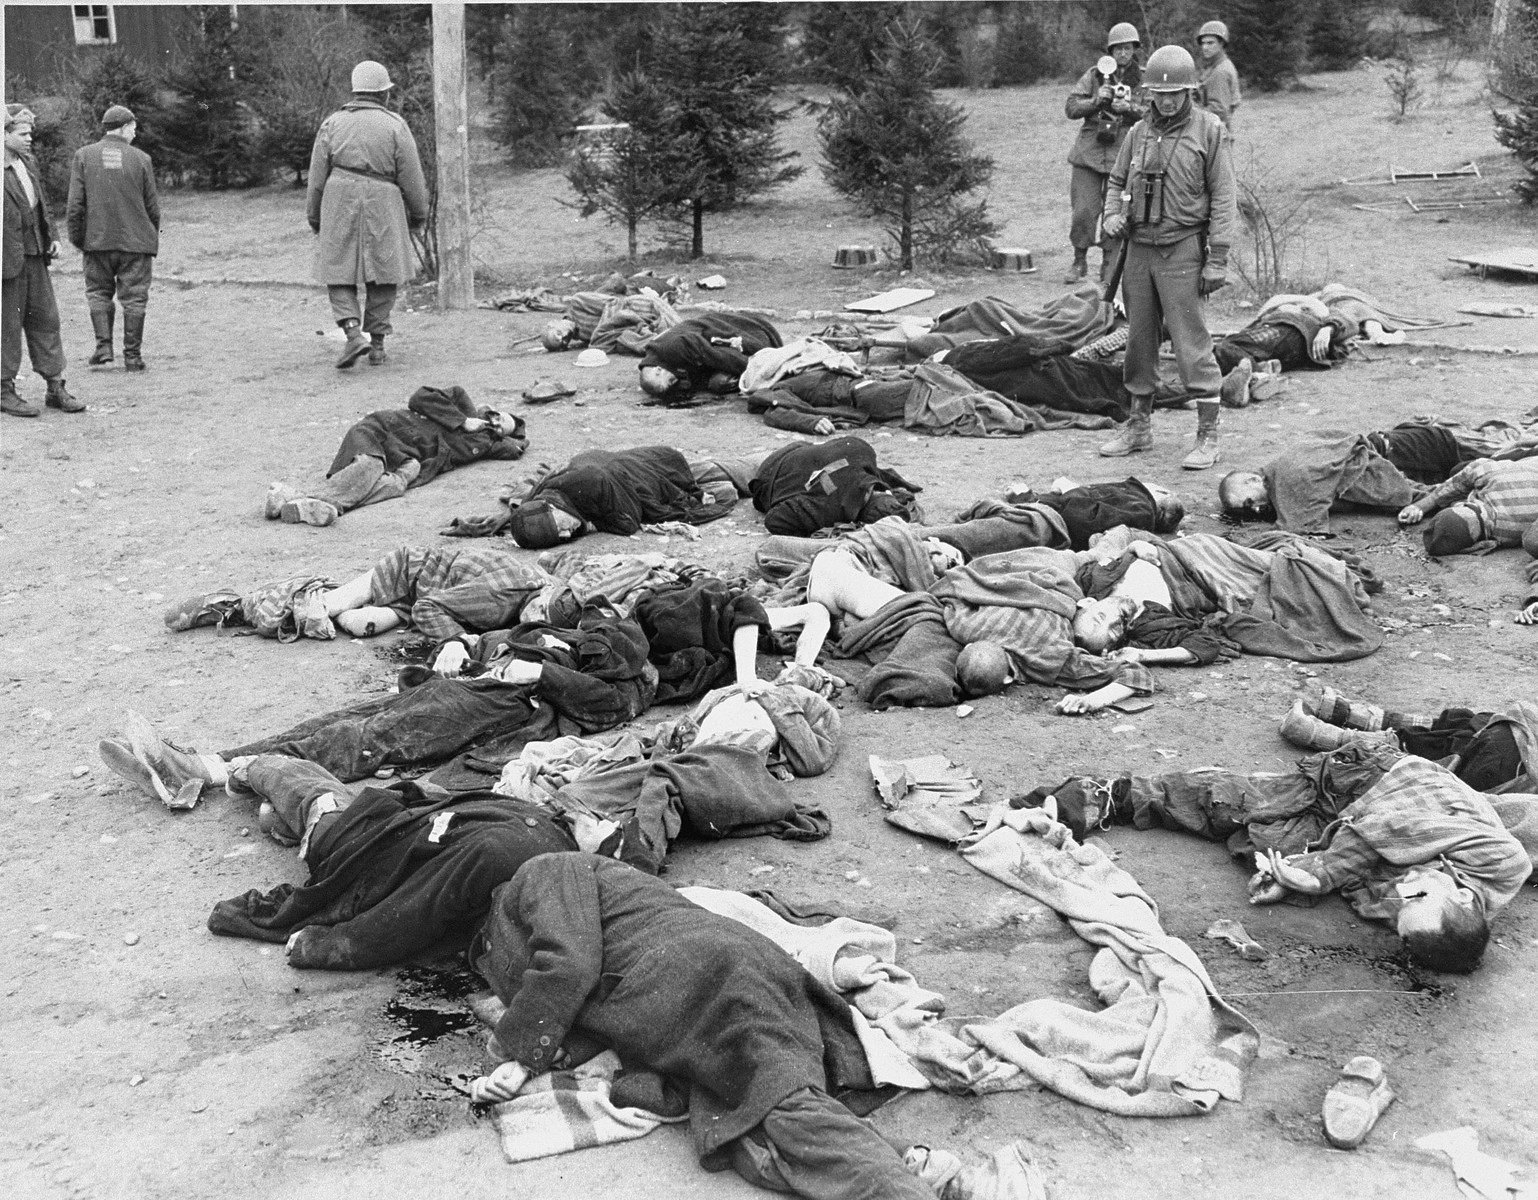 American soldiers view the bodies of prisoners that lie strewn on the ground in the newly liberated Ohrdruf concentration camp.

1st Lieutenant Earl J. Kelly is standing on the right.